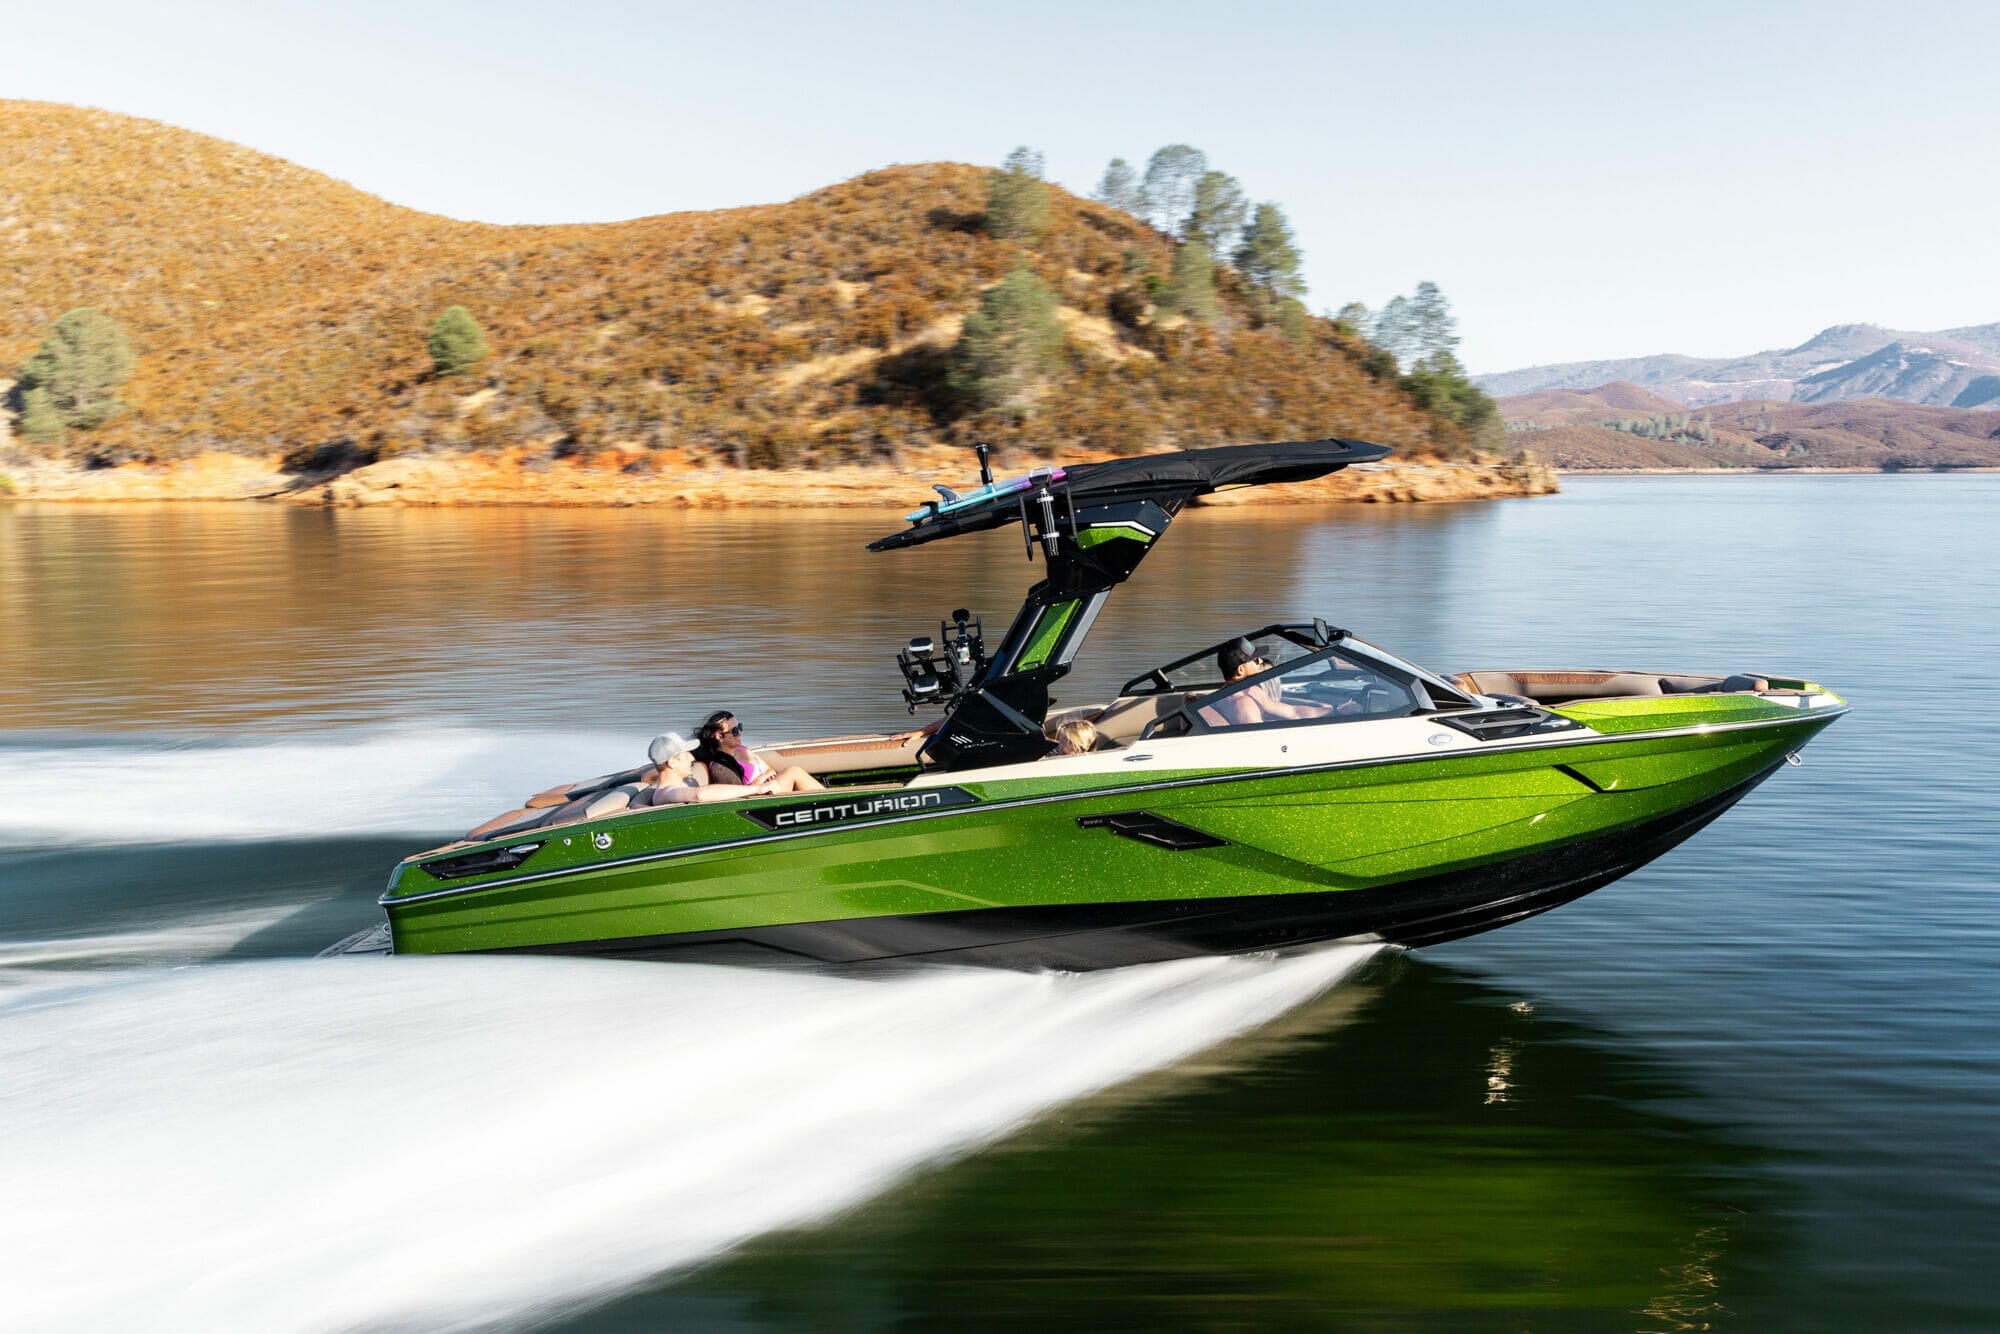 A green wakeboat is speeding through a body of water.